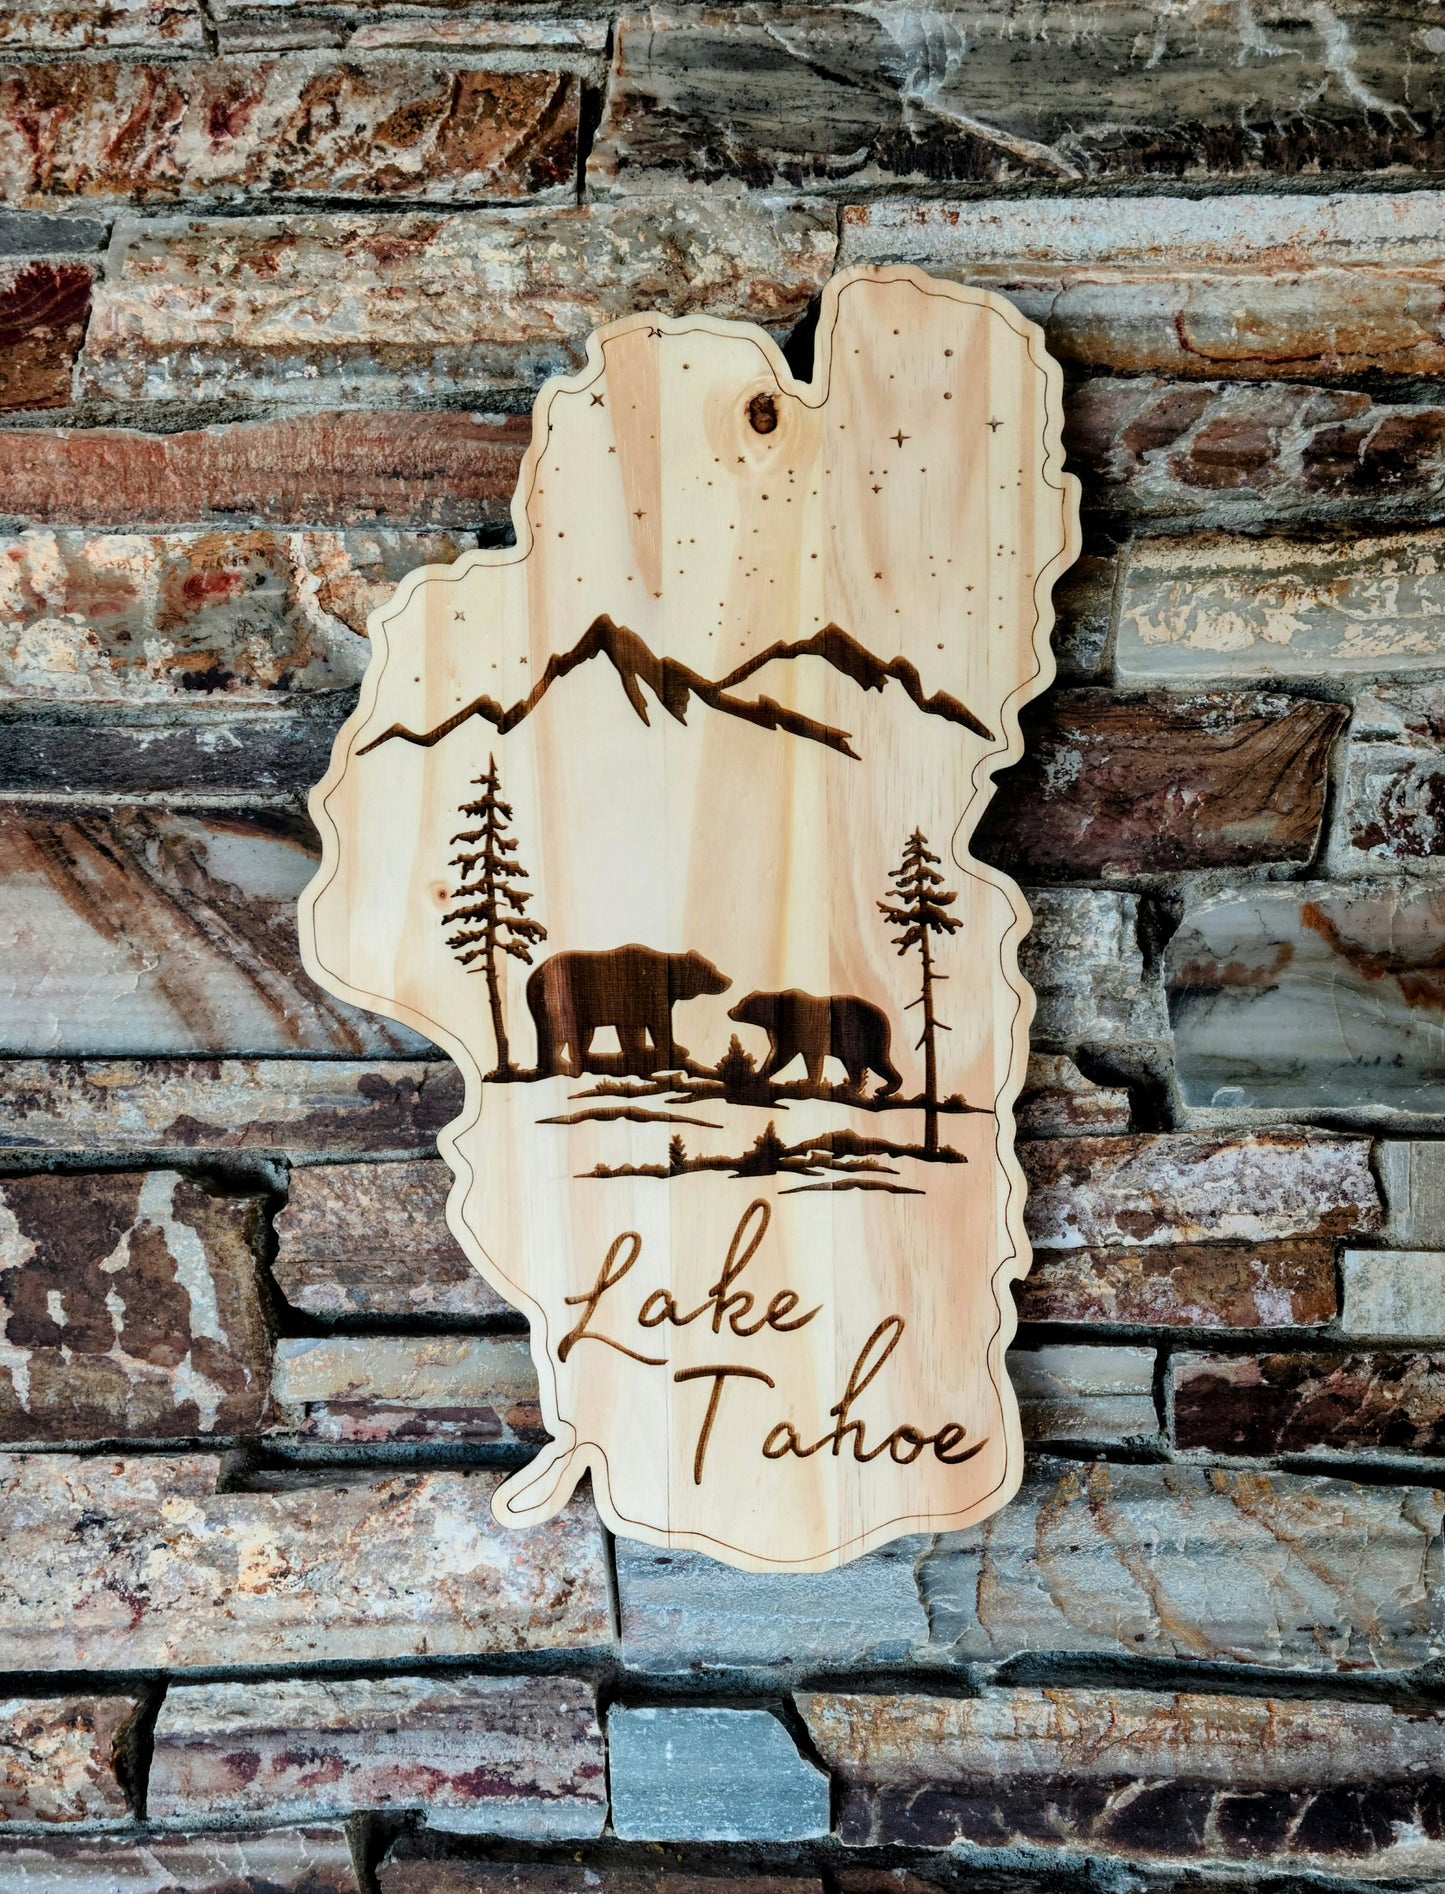 Lake Shaped Tahoe Rustic Cutout Sign with Bears